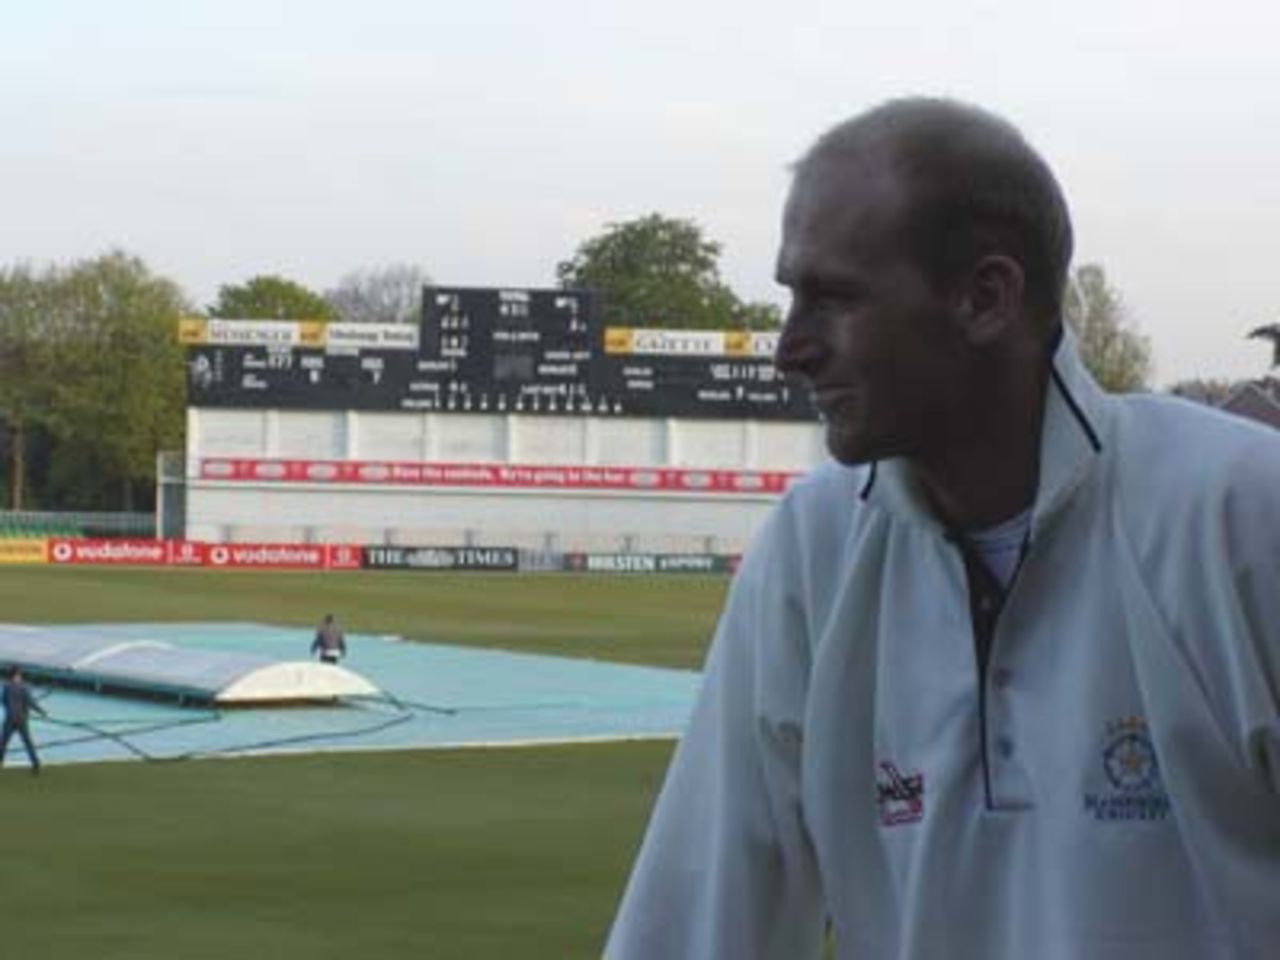 John Crawley relaxes at Canterbury after passing his double hundred